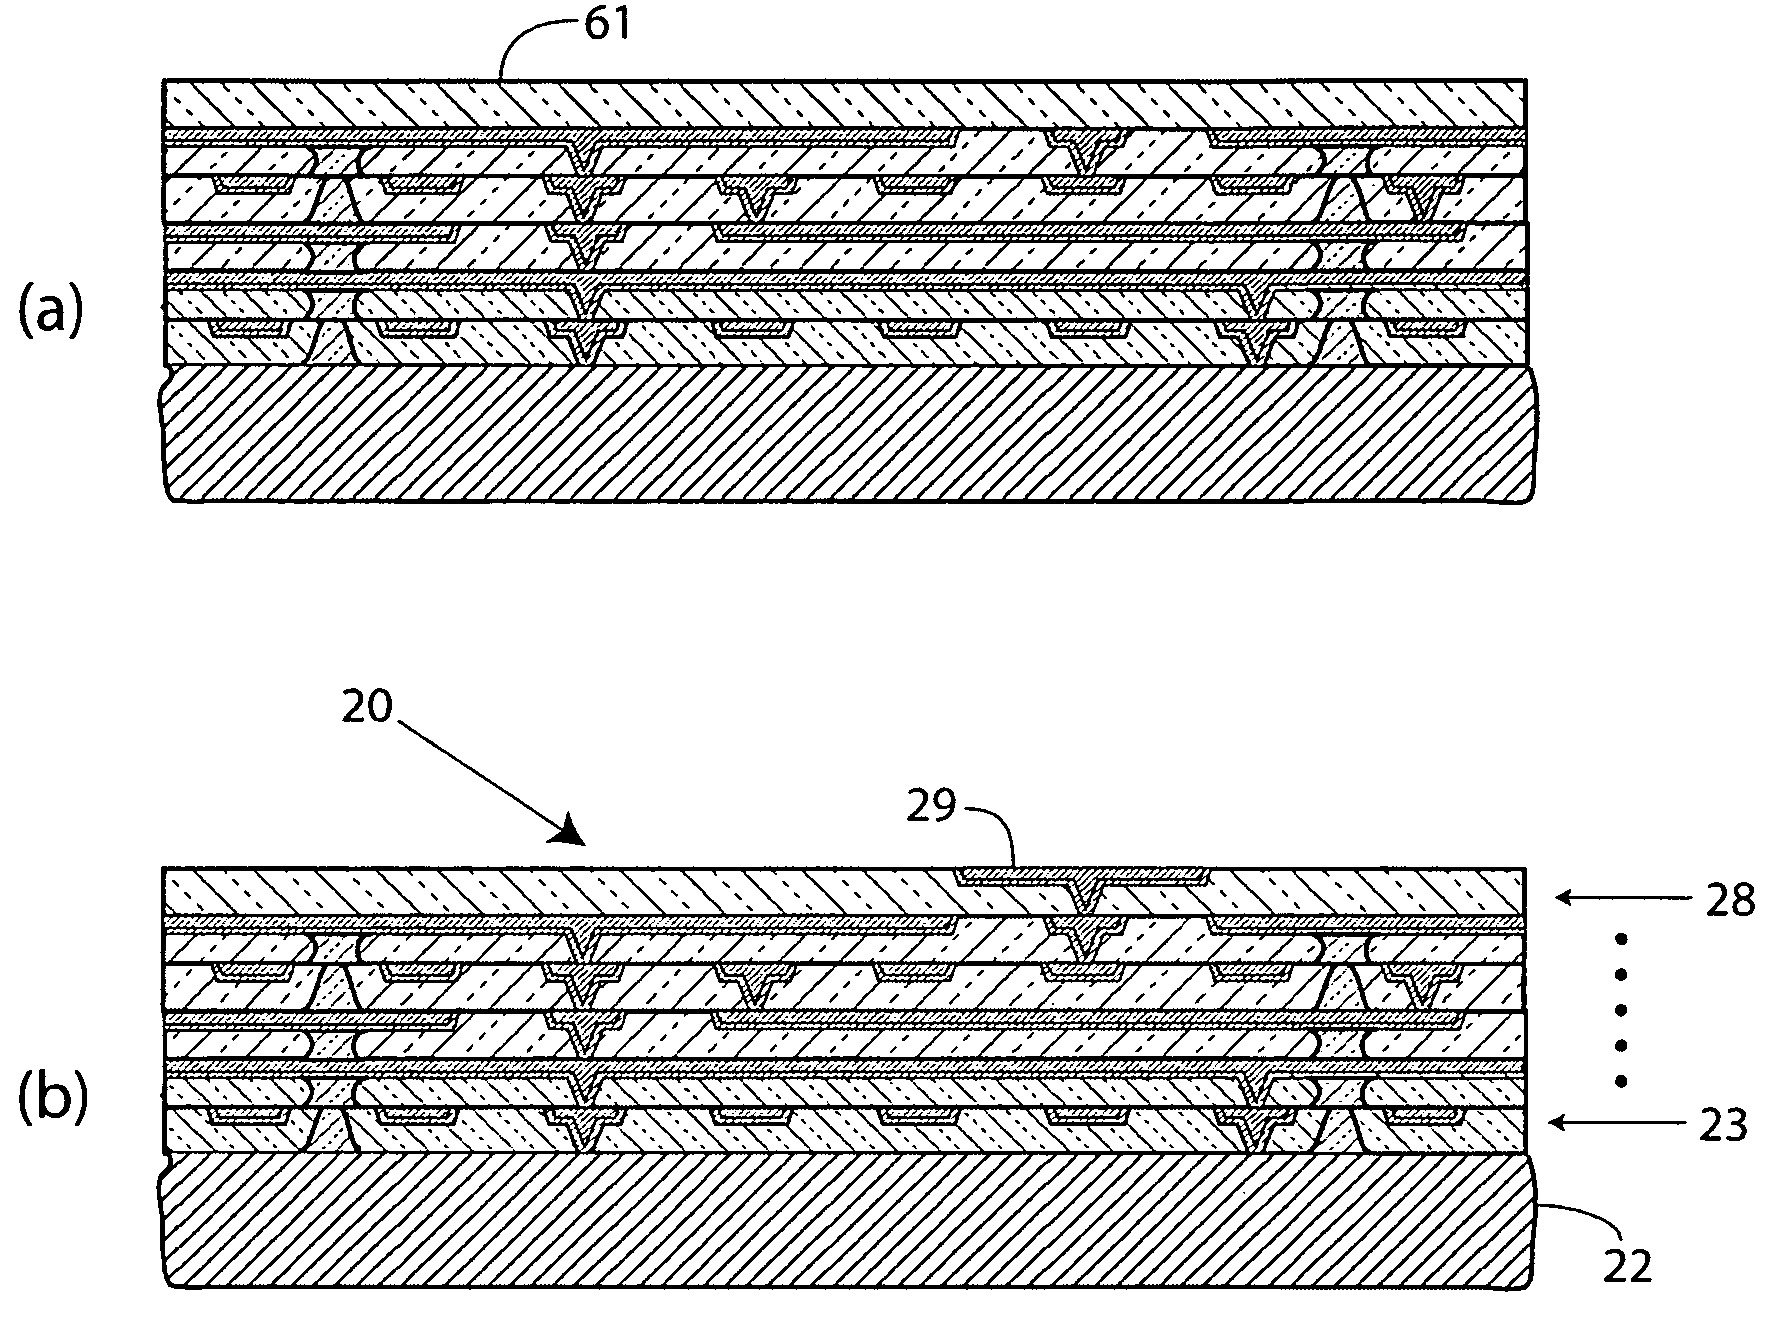 Tiled construction of layered materials